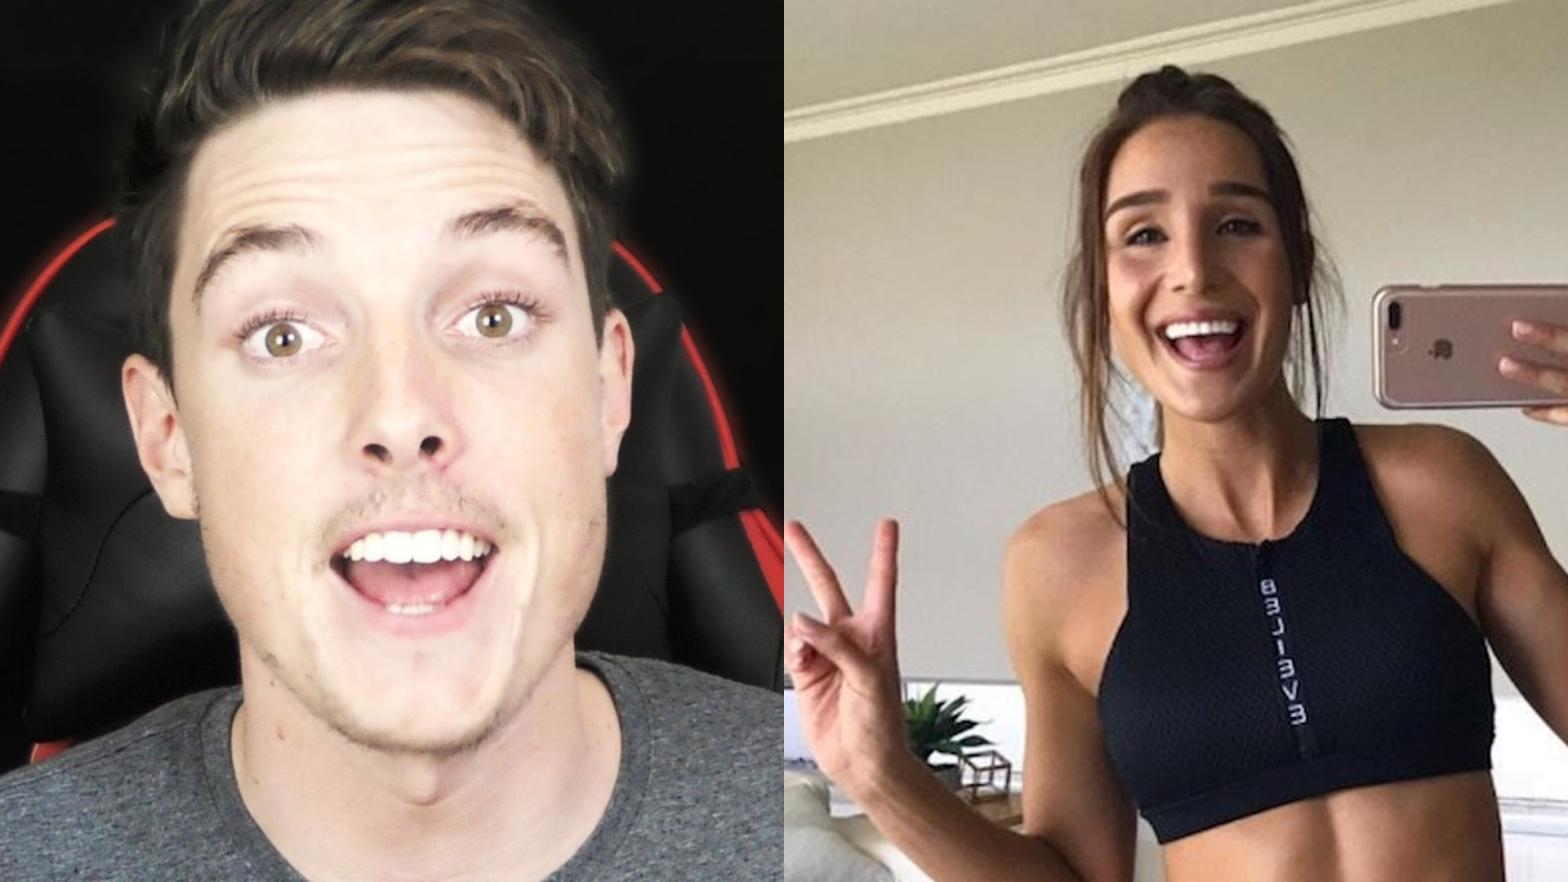 Influencer Kayla Itsines and YouTube LazarBeam would be the first to get the COVID vaccine under my plan